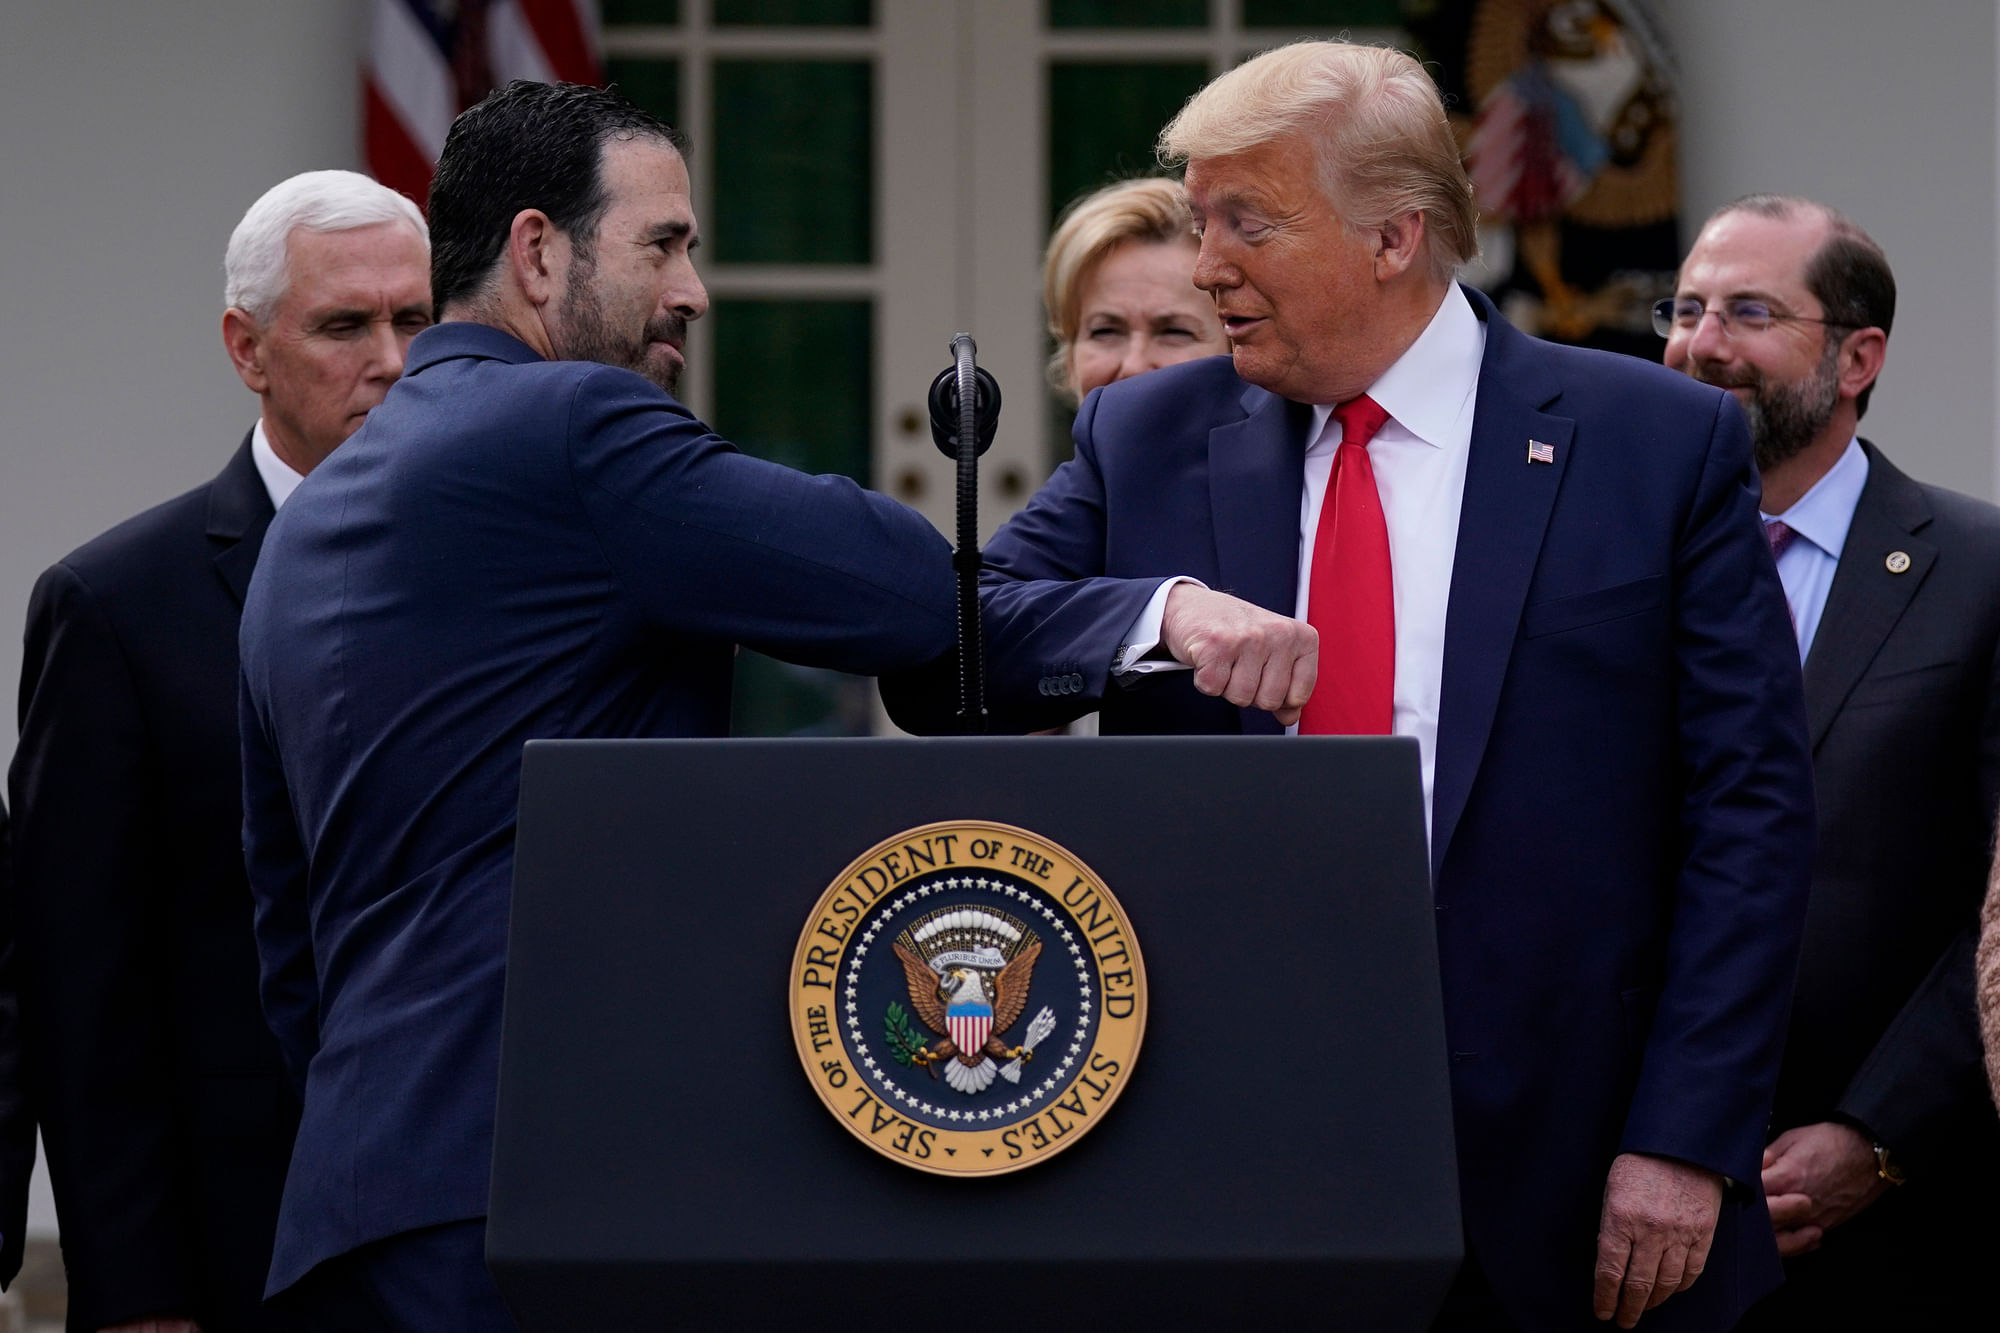 LHC Group’s Bruce Greenstein elbow bumps with President Donald Trump during a news conference about the coronavirus in the Rose Garden at the White House, Friday, 13 March, 2020, in Washington. 